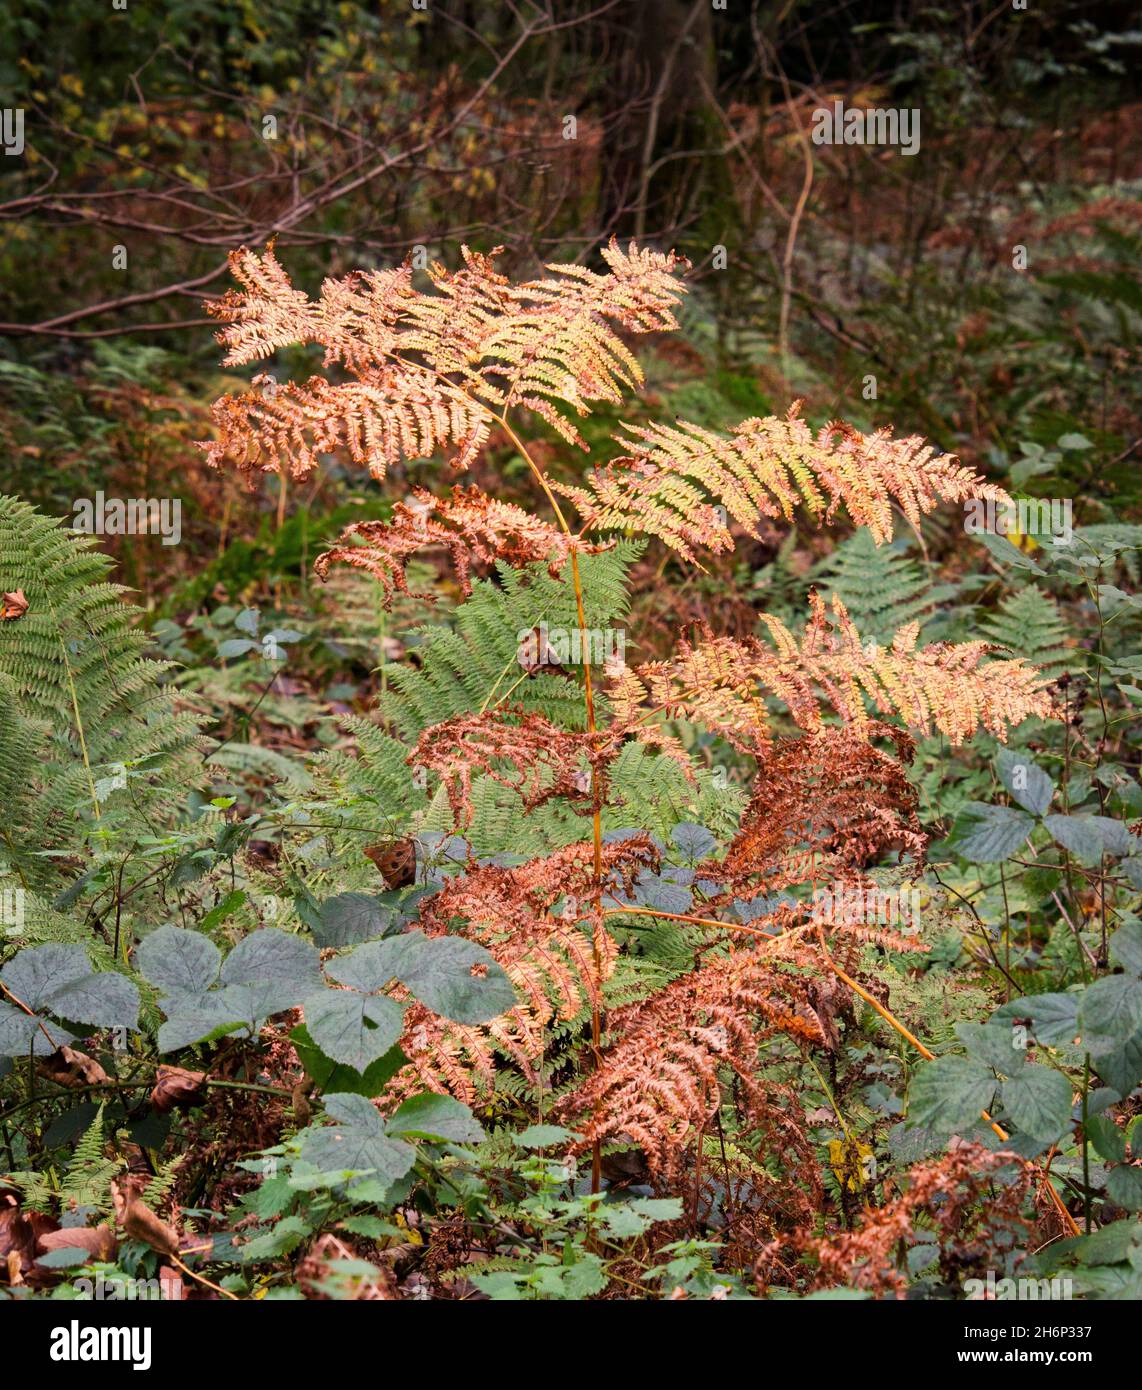 A close-up view of a fern in autumn colour, with the natural woodland background blurred to emphasise the plant Stock Photo